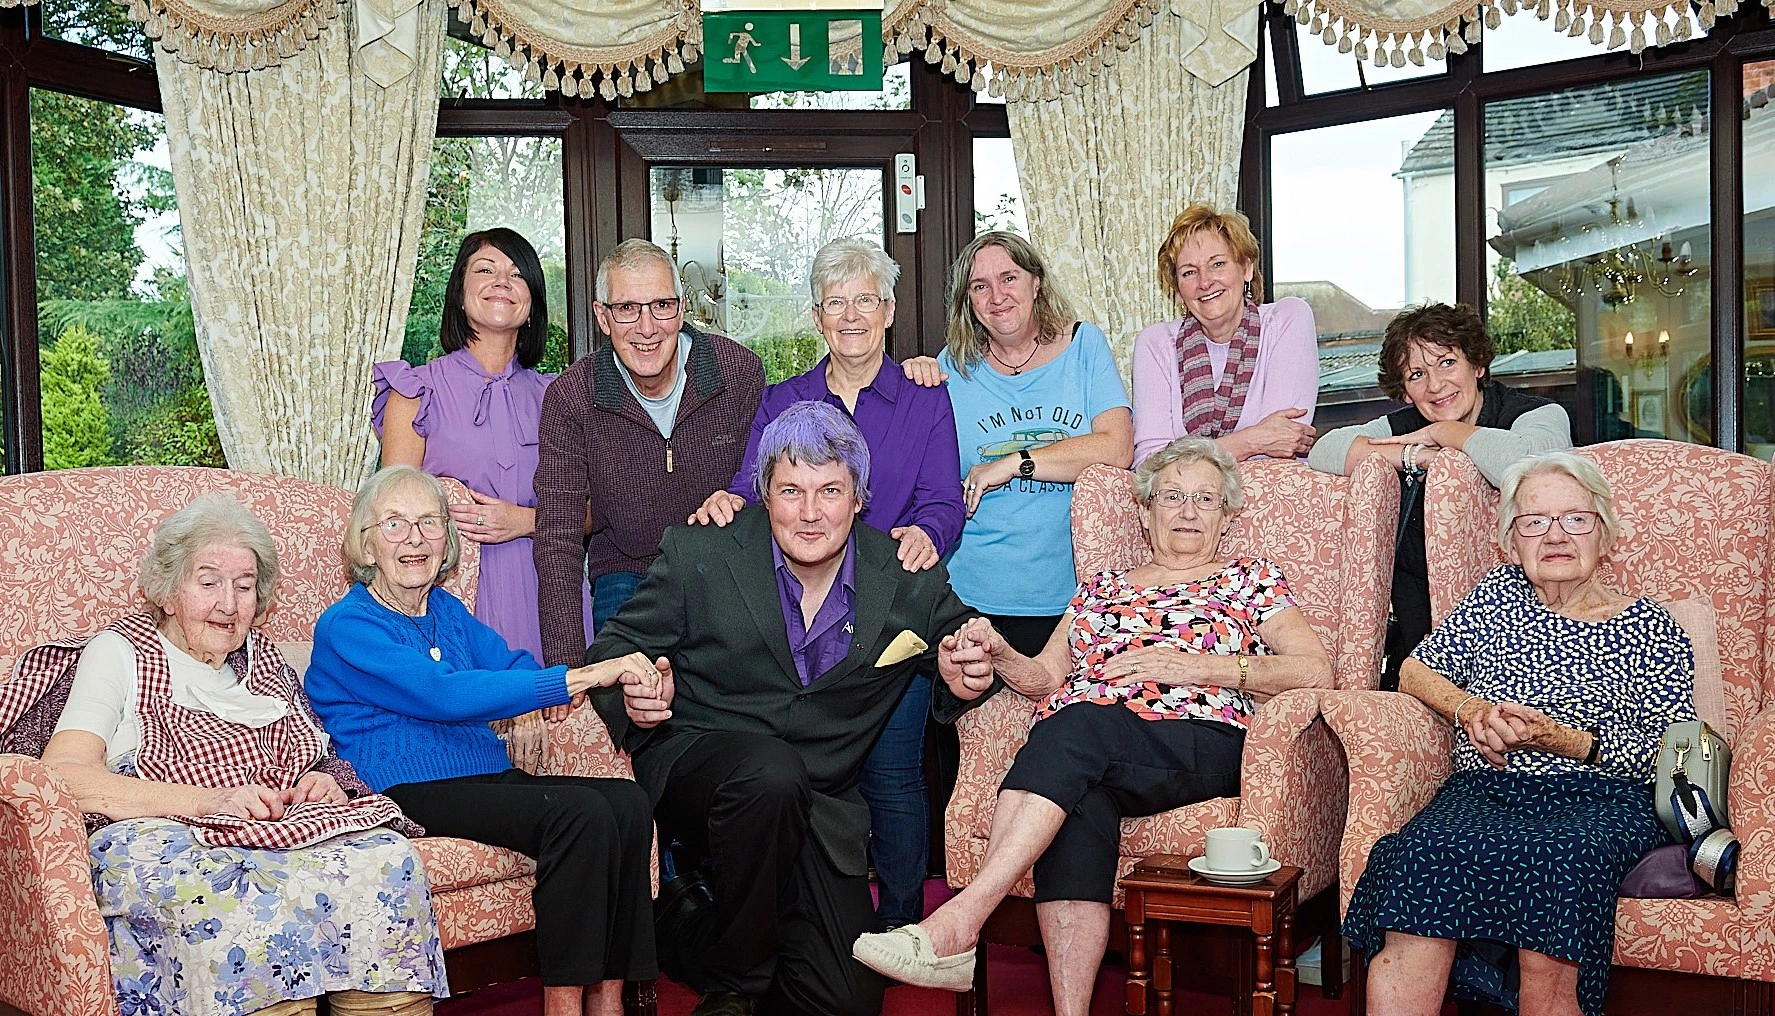 Activities coordinator Paul Hipwood with purple hair, the centre of a group of residents, family members and volunteers from the Alz Cafe. Everyone is smiling to the camera.